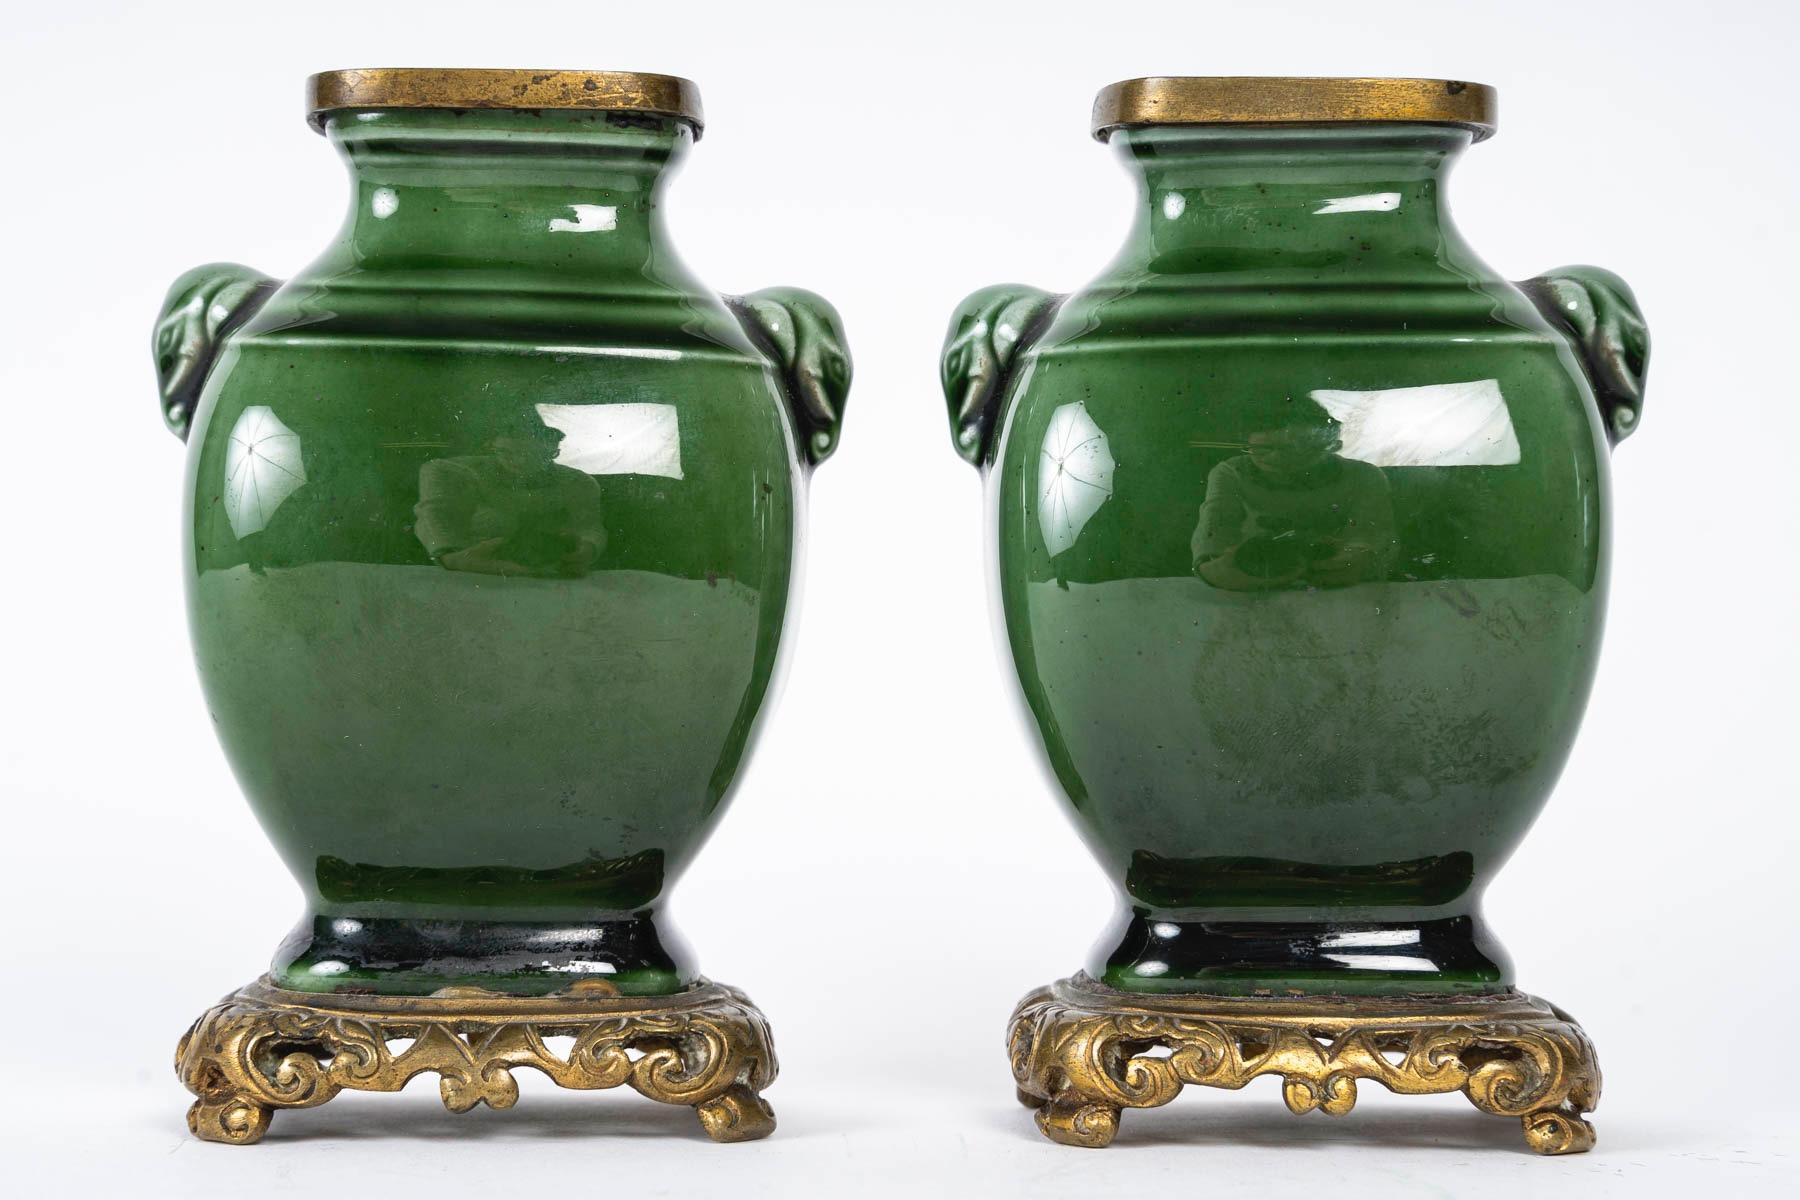 Theodore Deck (1823-1891) 
A deep green enameled faience miniature pair of vases molded in the Chinese Archaistic Taste.
Coves in the shape of elephant heads.
With open-worked ormolu mounts to the base and the rim
Uppercased TH.D impressed